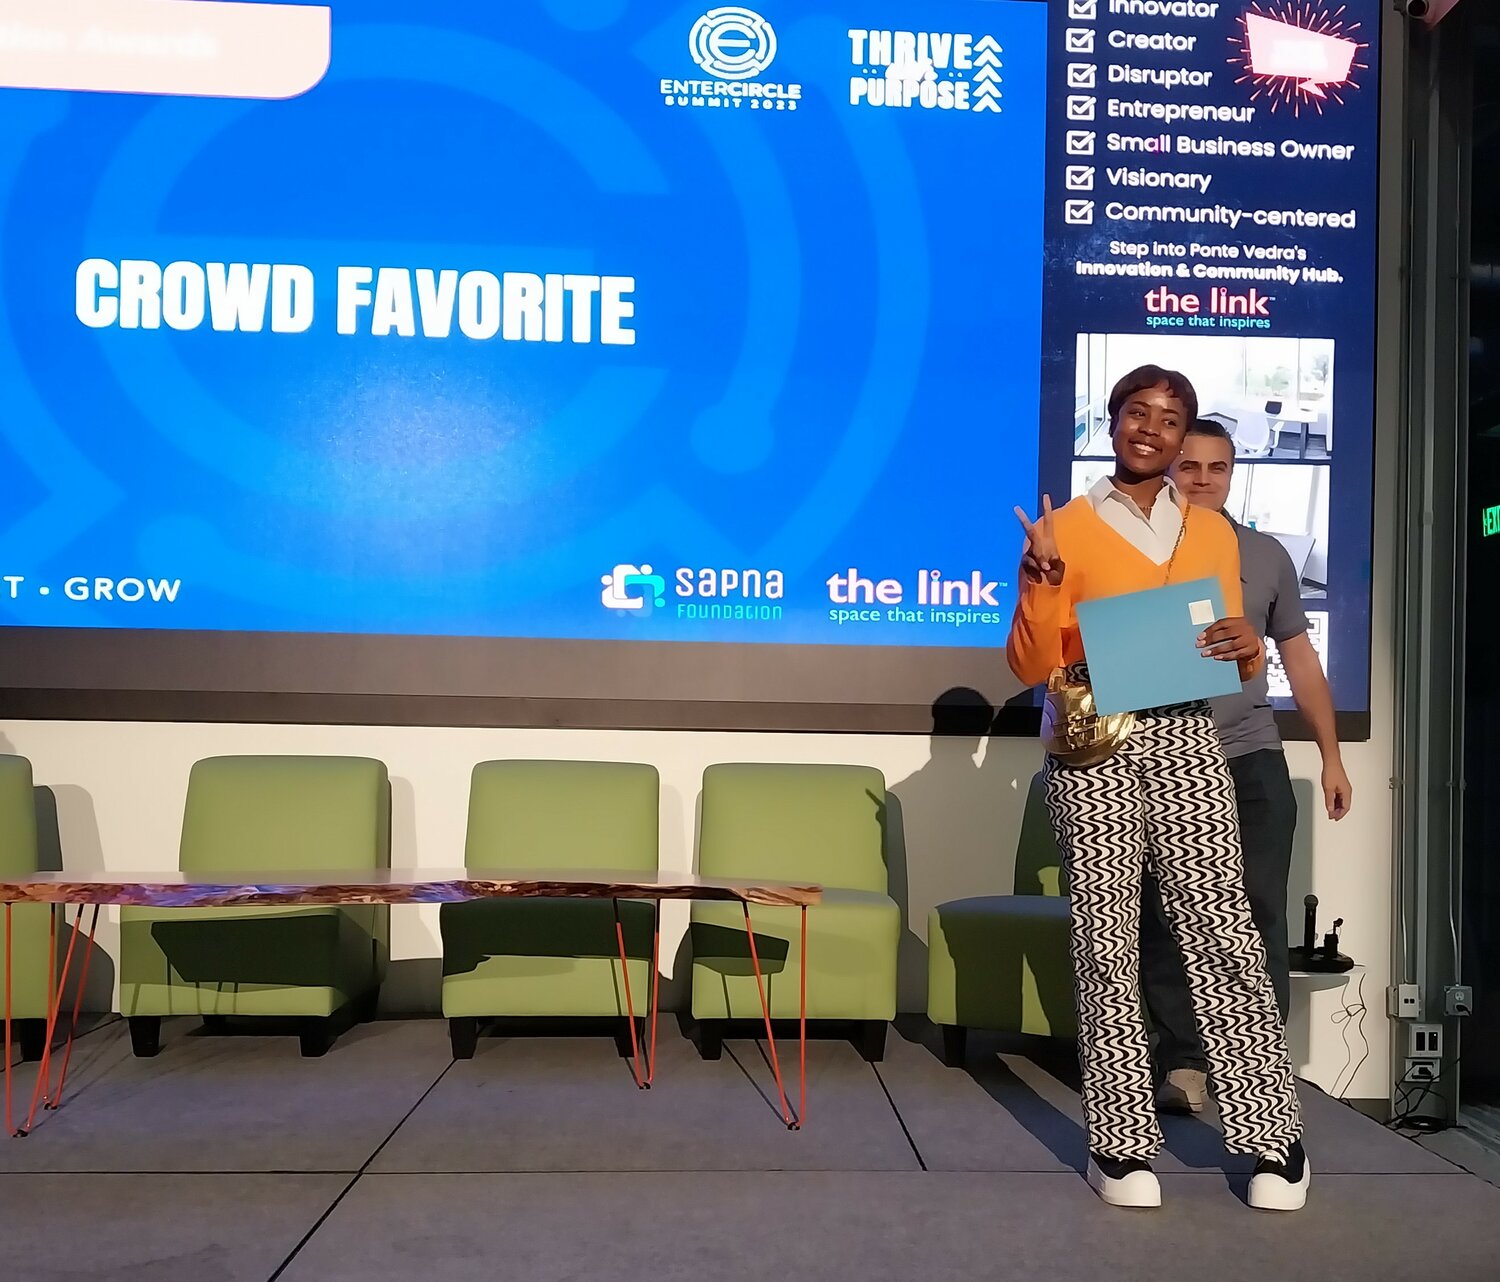 Emmy James of Renew Her Essentials received the Crowd Favorite award at the EnterCircle pitch competition.